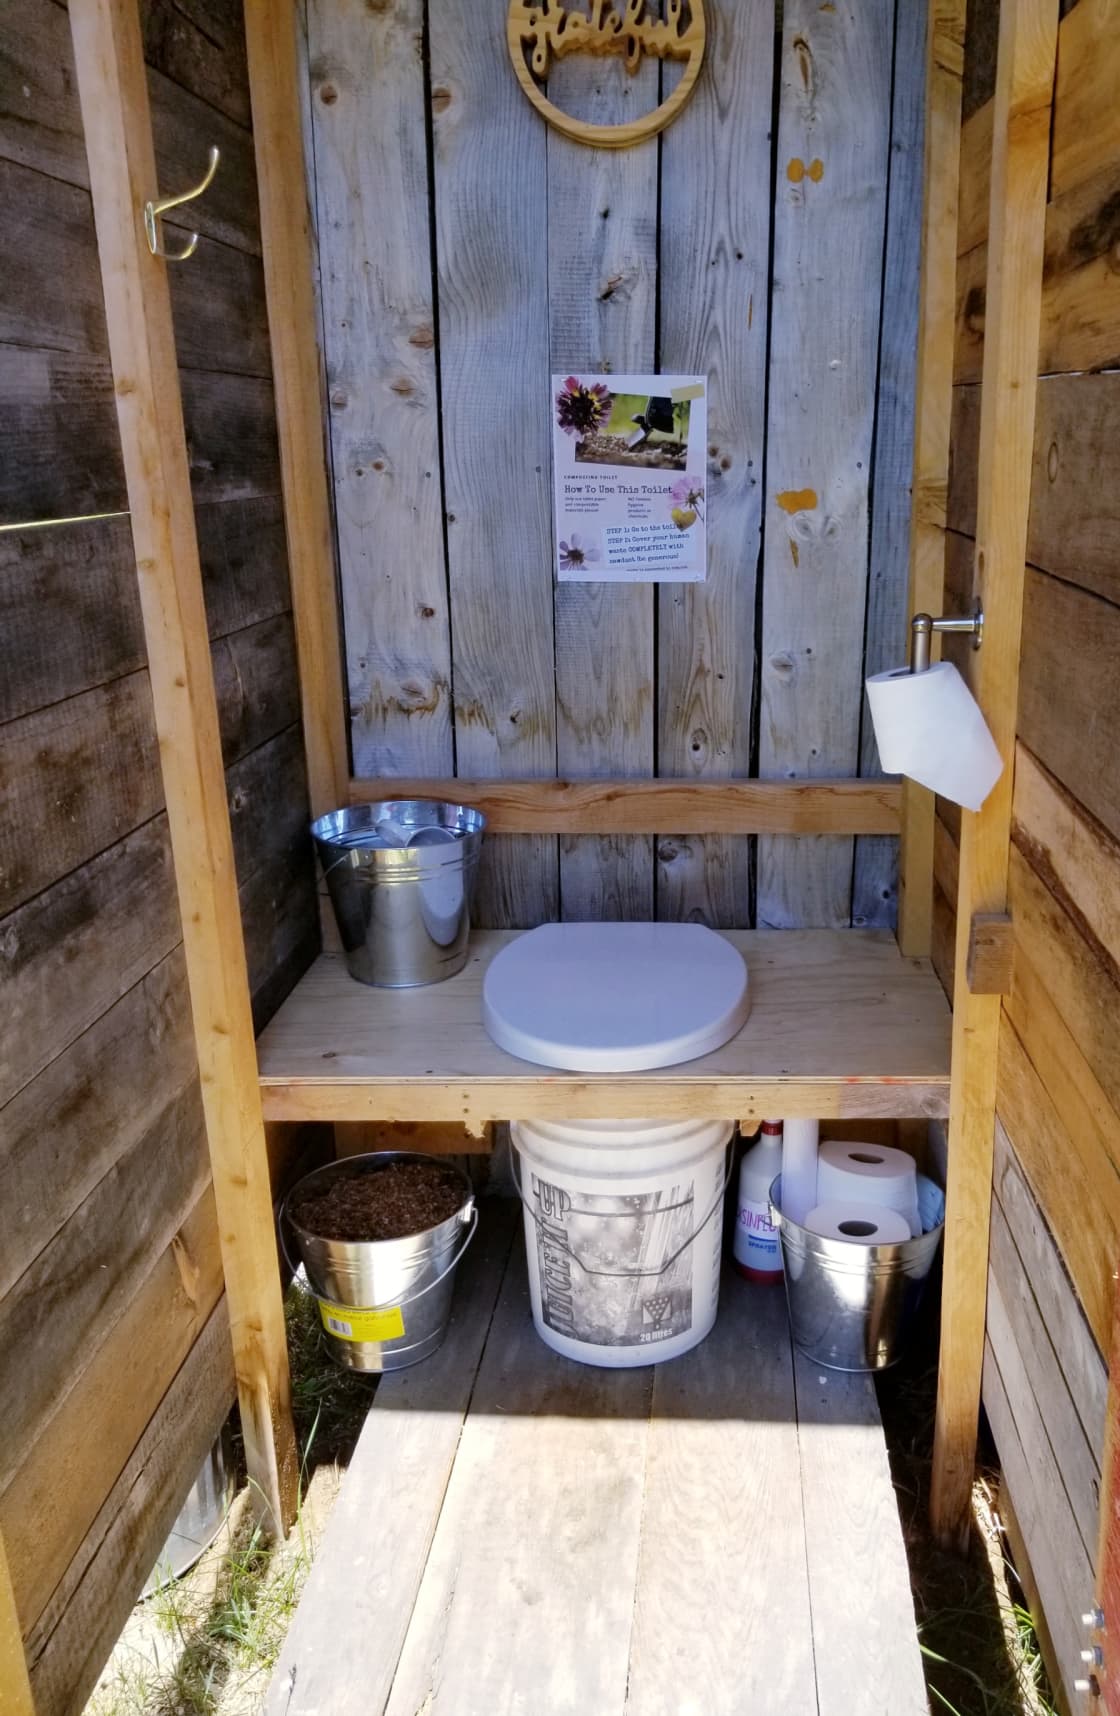 Composting toilet that is easy to use, best for the environment and no smells!